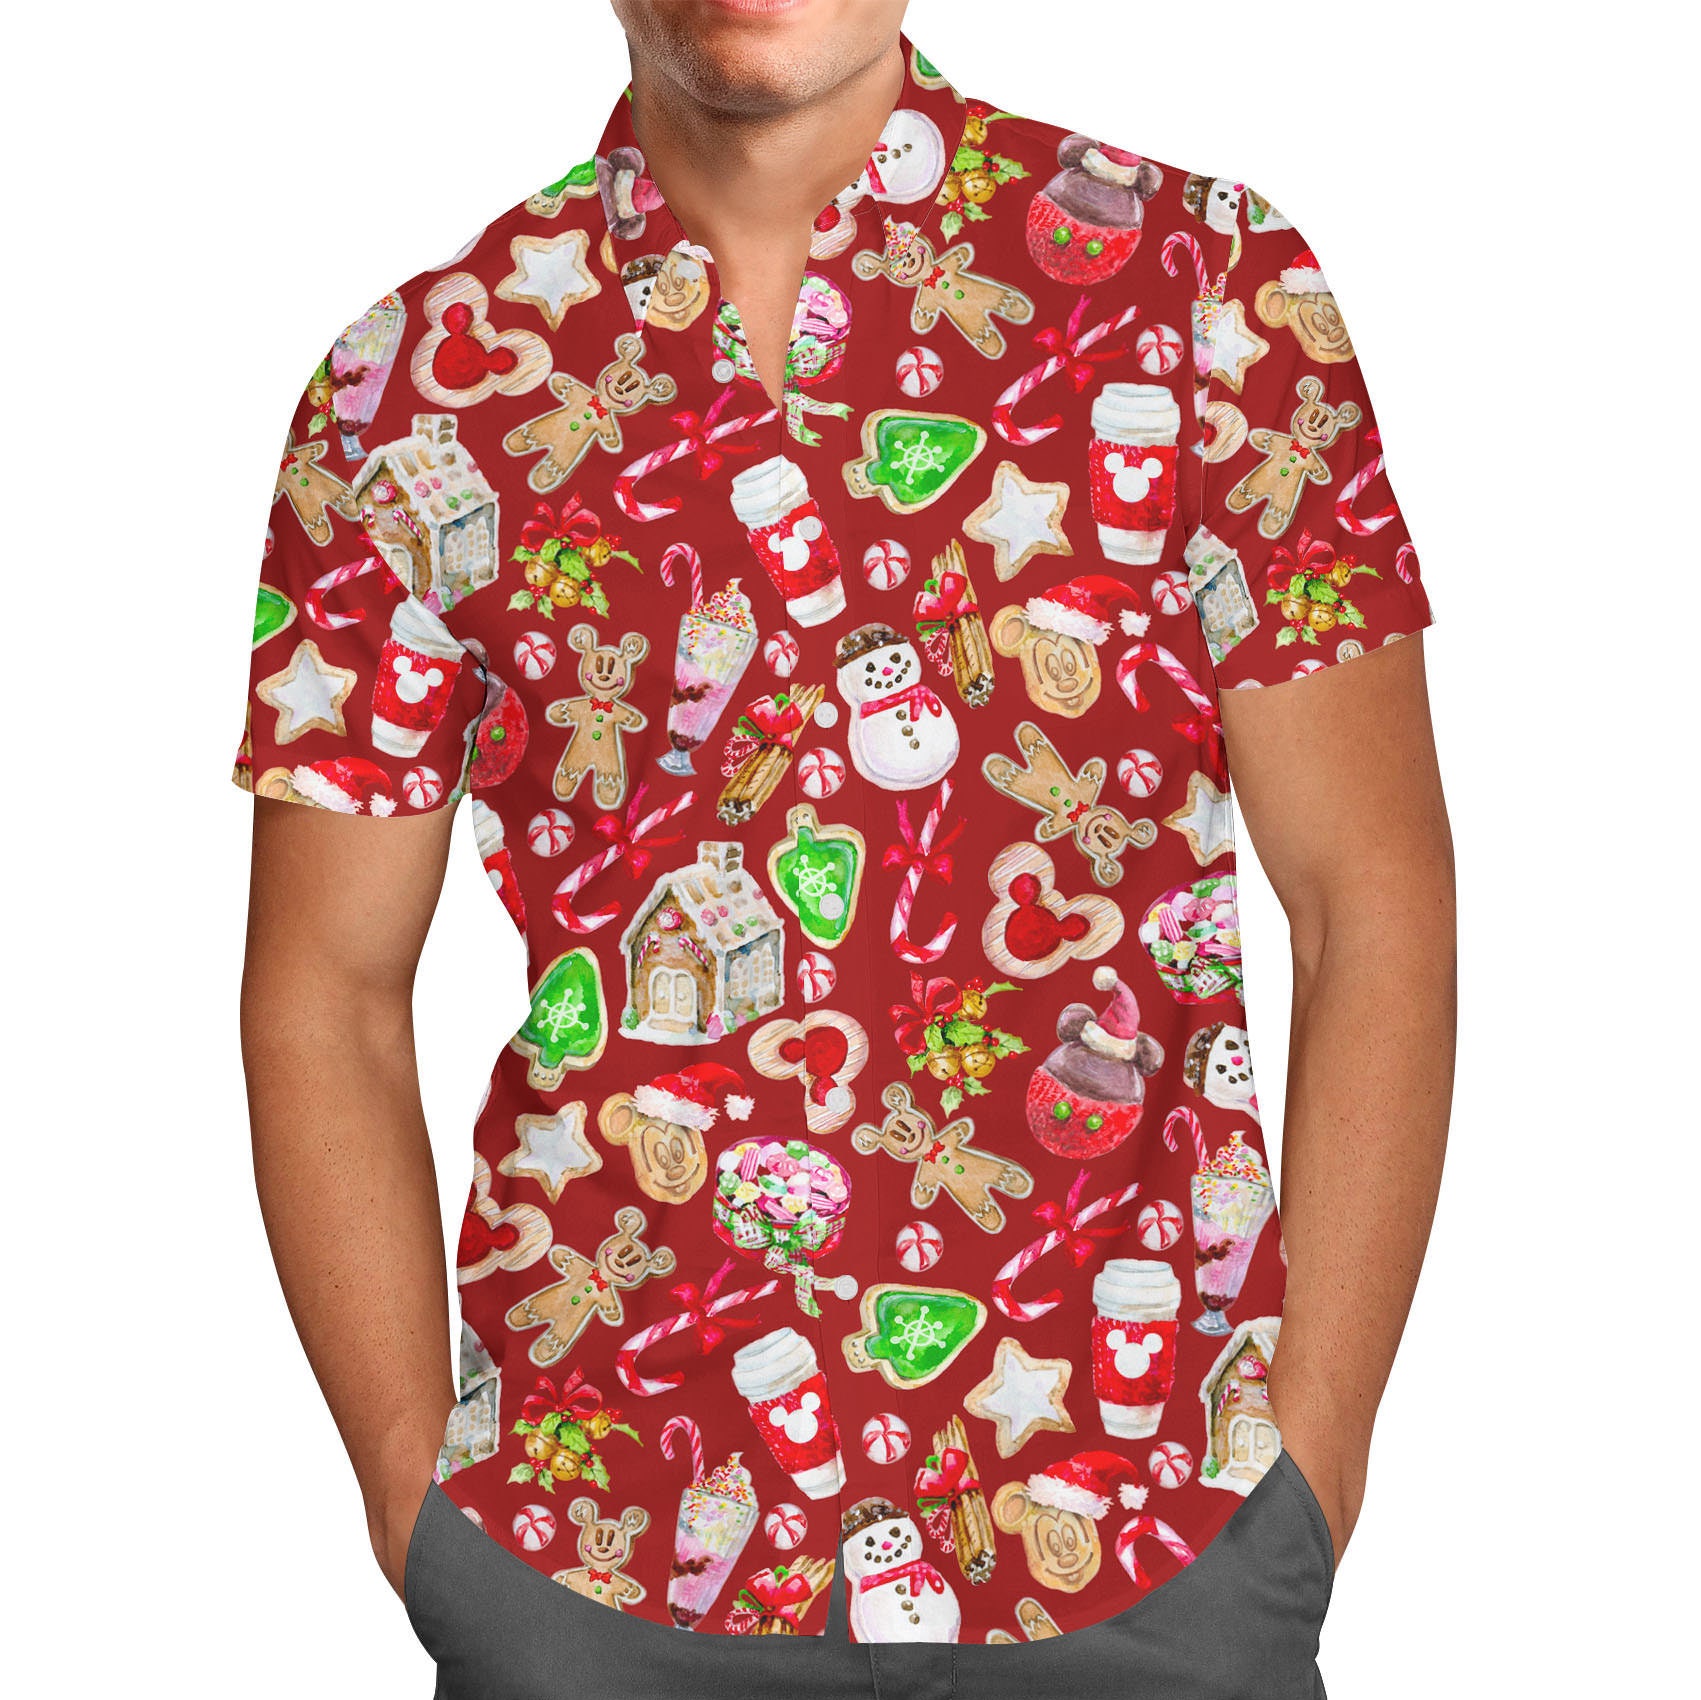 Discover Disney Christmas Snack Goals - Men's Button Down Short-Sleeved Shirt in XS - 5XL